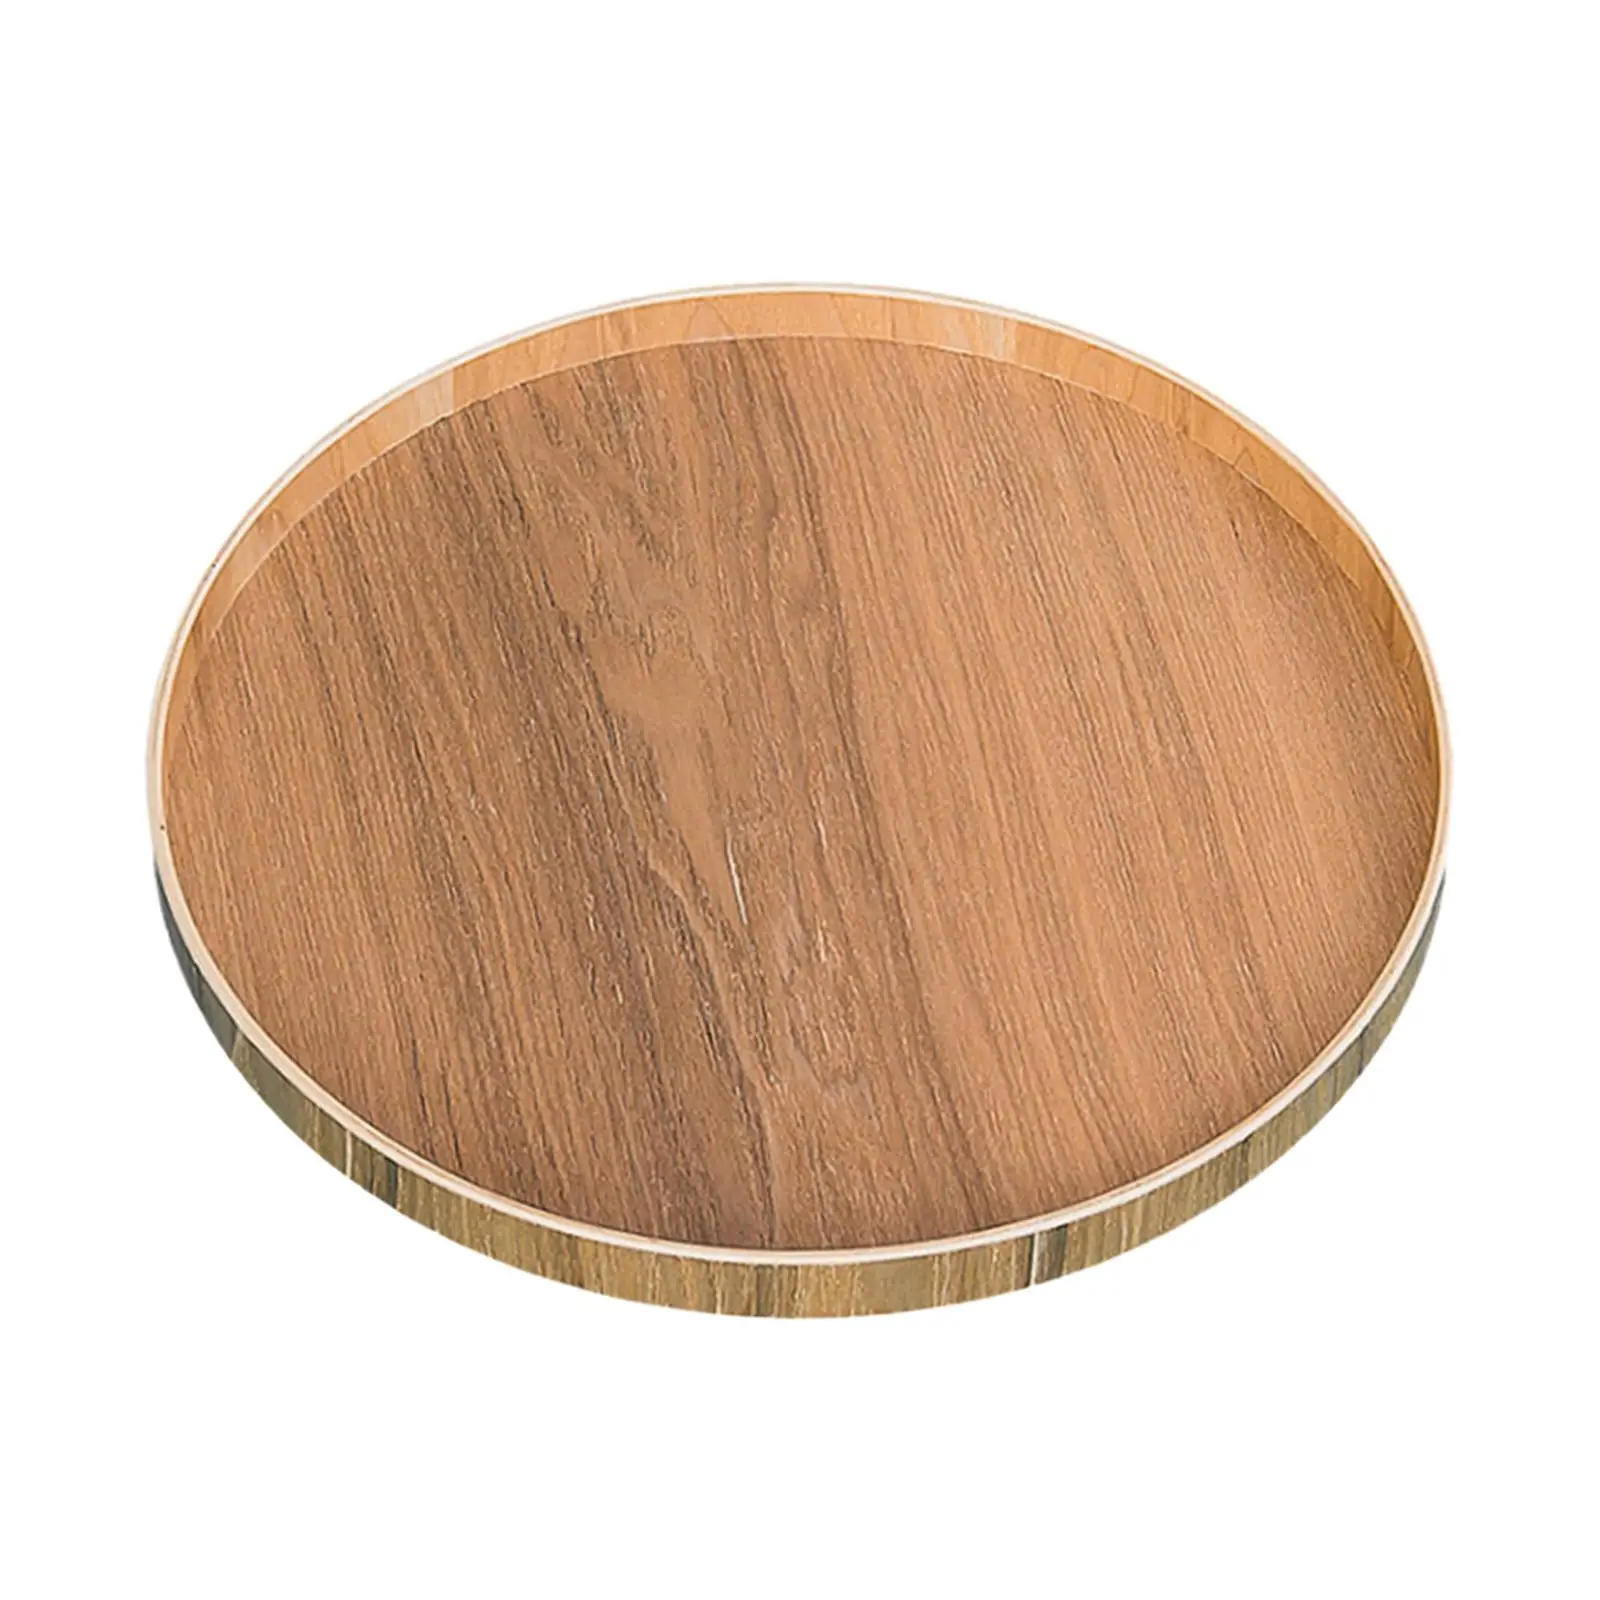 Round Serving Tray Farmhouse Decorative Tray Multipurpose Party Serving Platter for Cabinet Bathroom Kitchen Home Dining Table